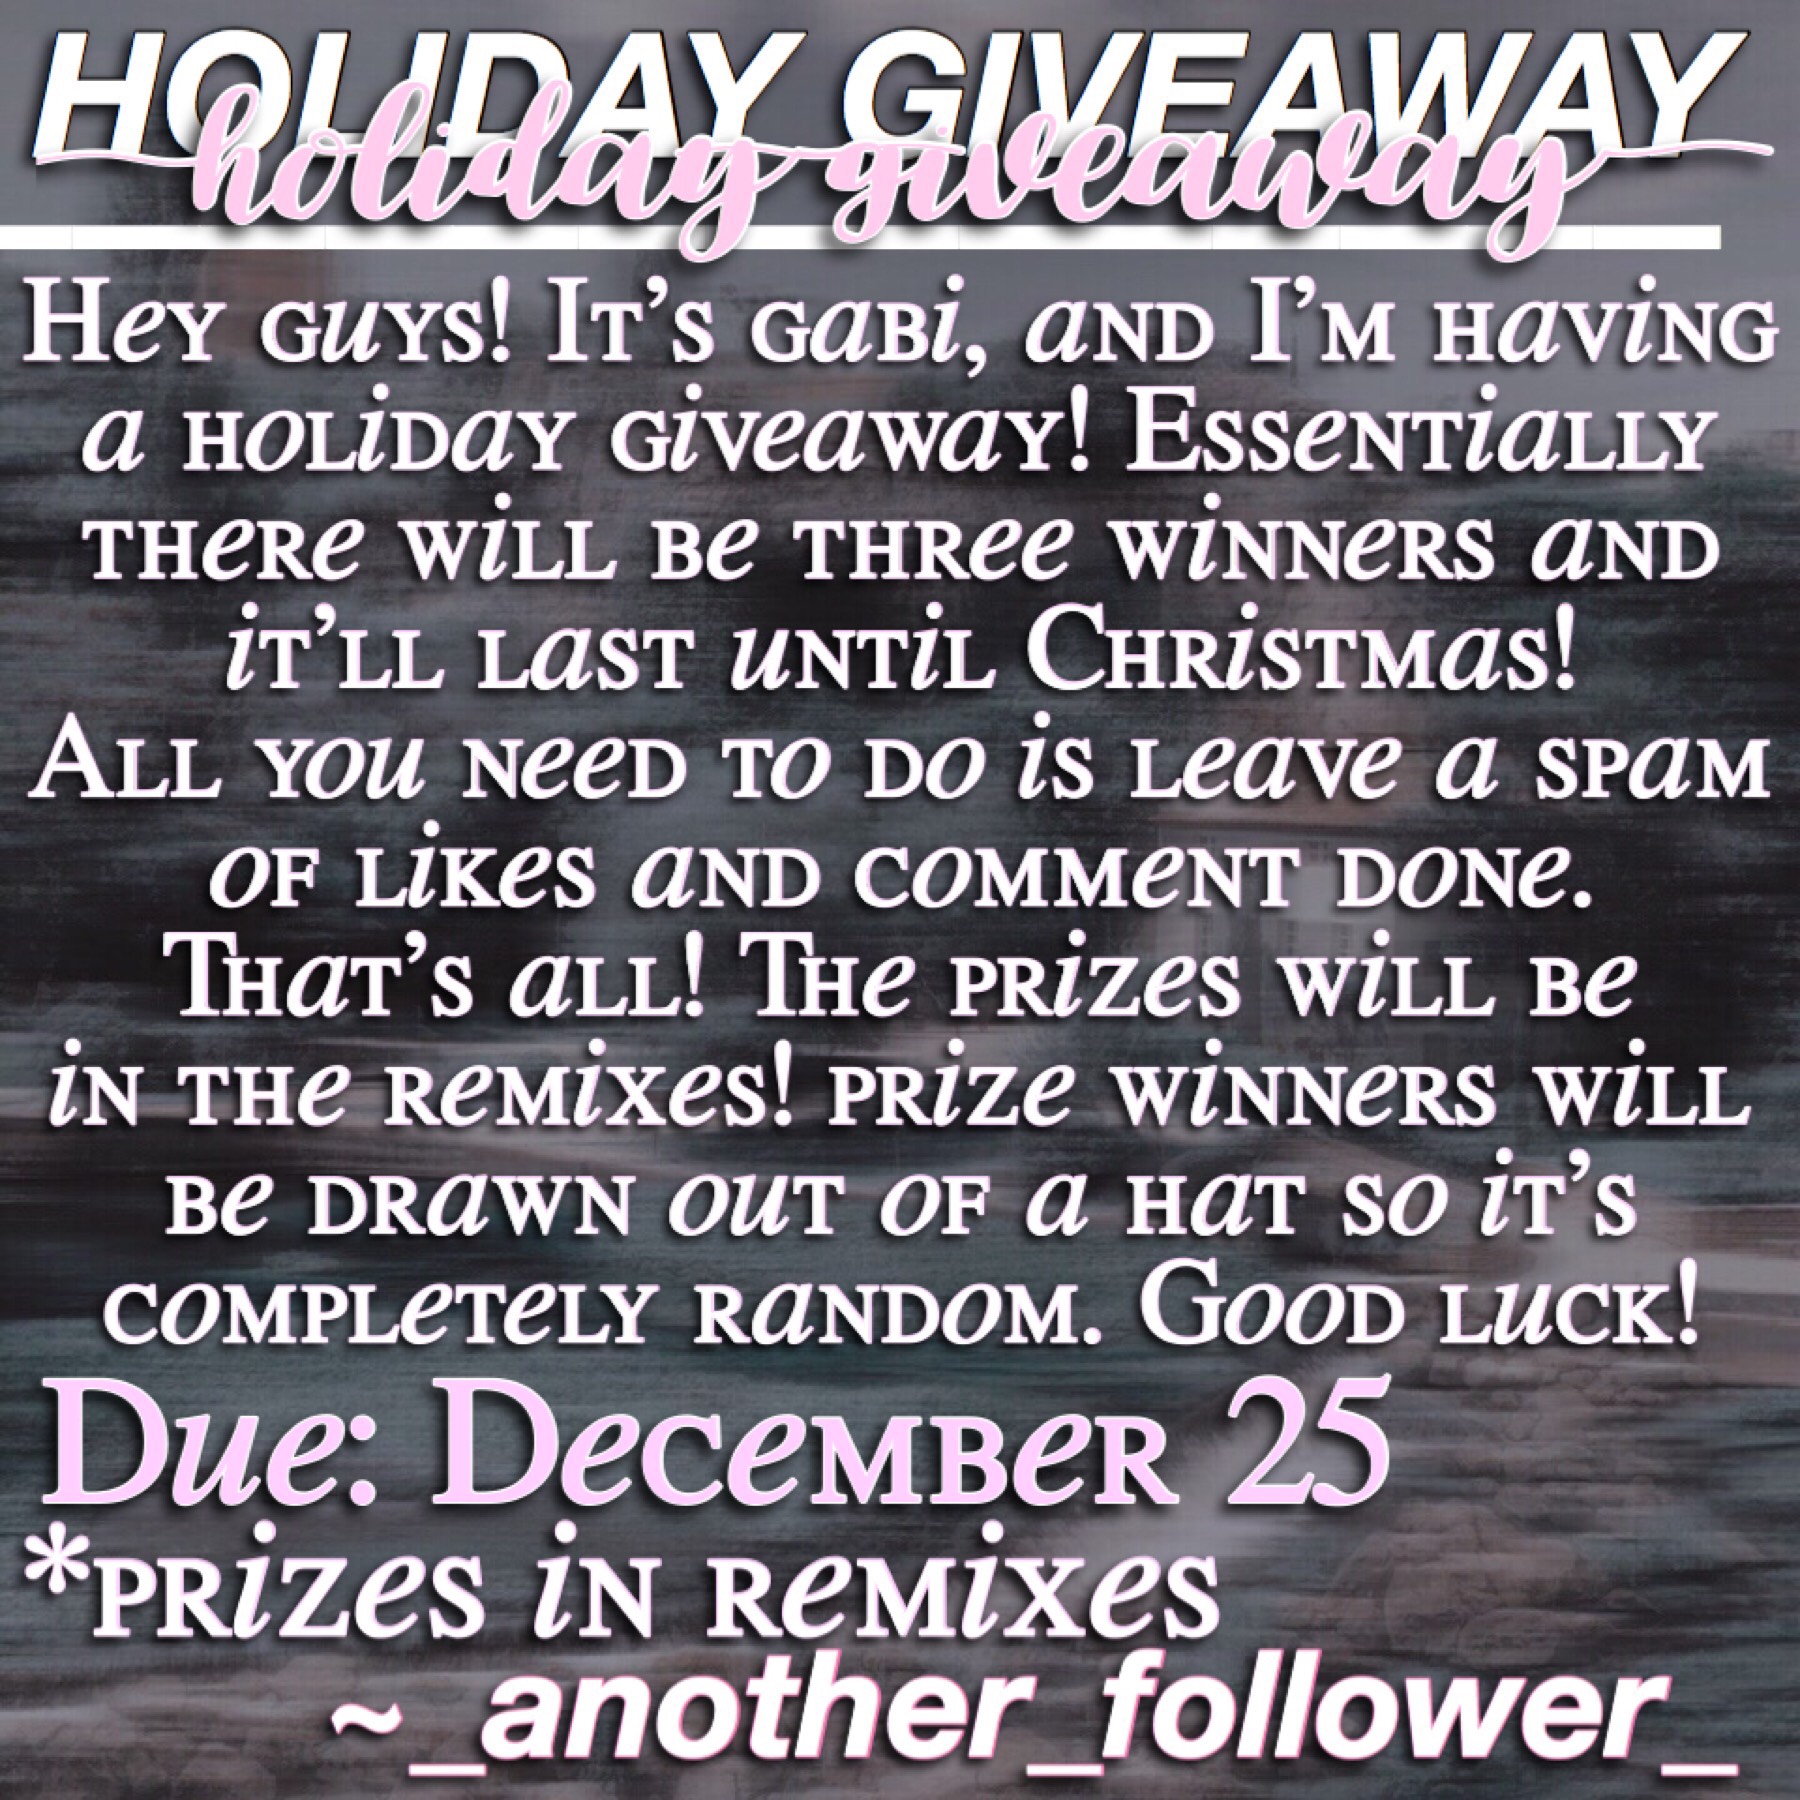 Happy thanksgiving everyone! I hope you had a great day if you do or don’t celebrate it. I also hope you enter this and you find the prizes good! This is a holiday giveaway but it’s also kind of in honor of my return to pc and me reaching 24k! 